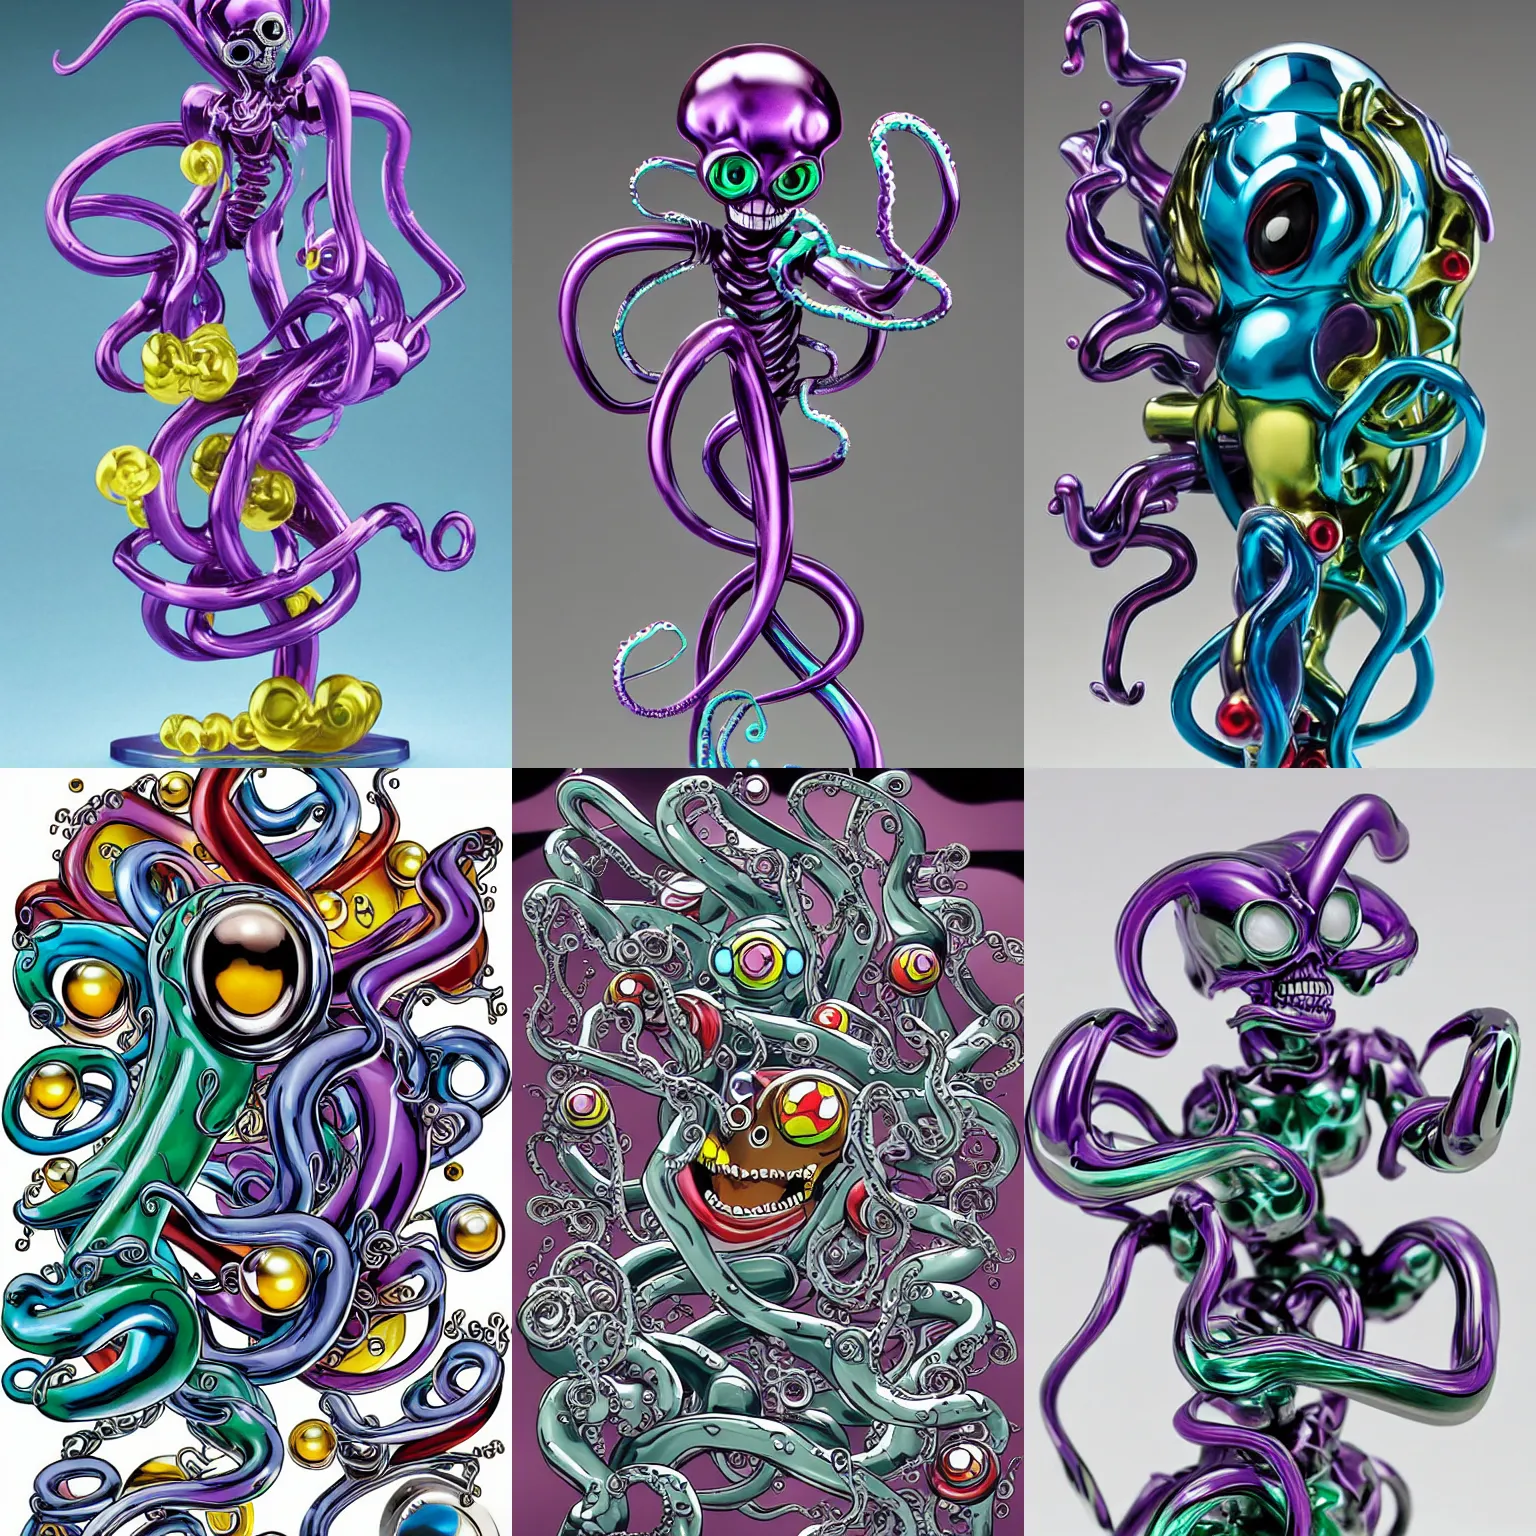 Prompt: swirly chrome tubes tentacles anatomy, medusa, splash, transformer robots (2005), superhero, cute, happy, sharp, funny, fun, screaming, laughing, drooling, elegant, simplistic splashy glossy melted skeleton skeletor action figure heman, drops, drips, beautiful cute, cute melting miniature resine action figure, 3d fractals, pictoplasma, tintoy swampmonster robot mechabot detailed wrinkled face Figure sculpture, goggle eyes, 3d primitives, in a Studio hollow, by pixar, by chris mars, by jason edmiston, cgsociety, zbrush, artstation, by greg rutkowski, by craig mullins, by haeckel